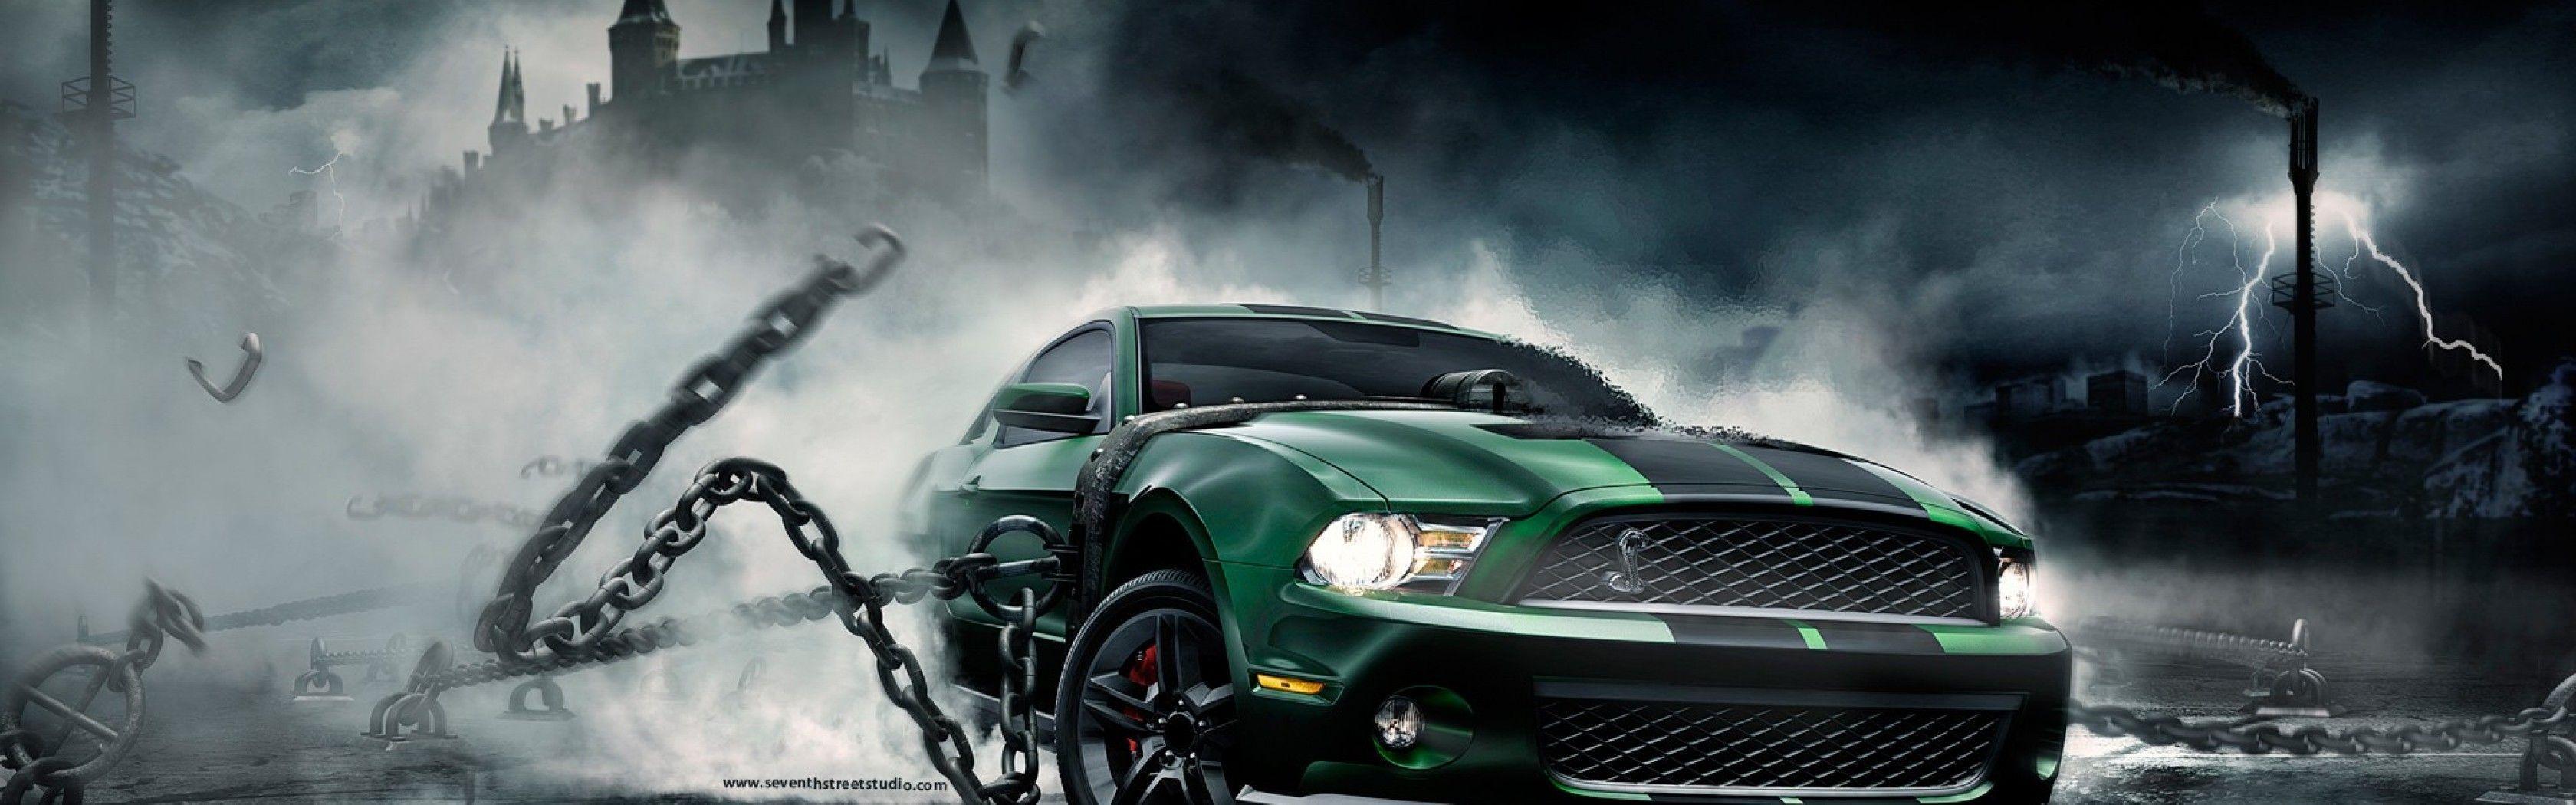 Mustang Wallpaper For Android HD Wallpaper Picture. Top Vehicle